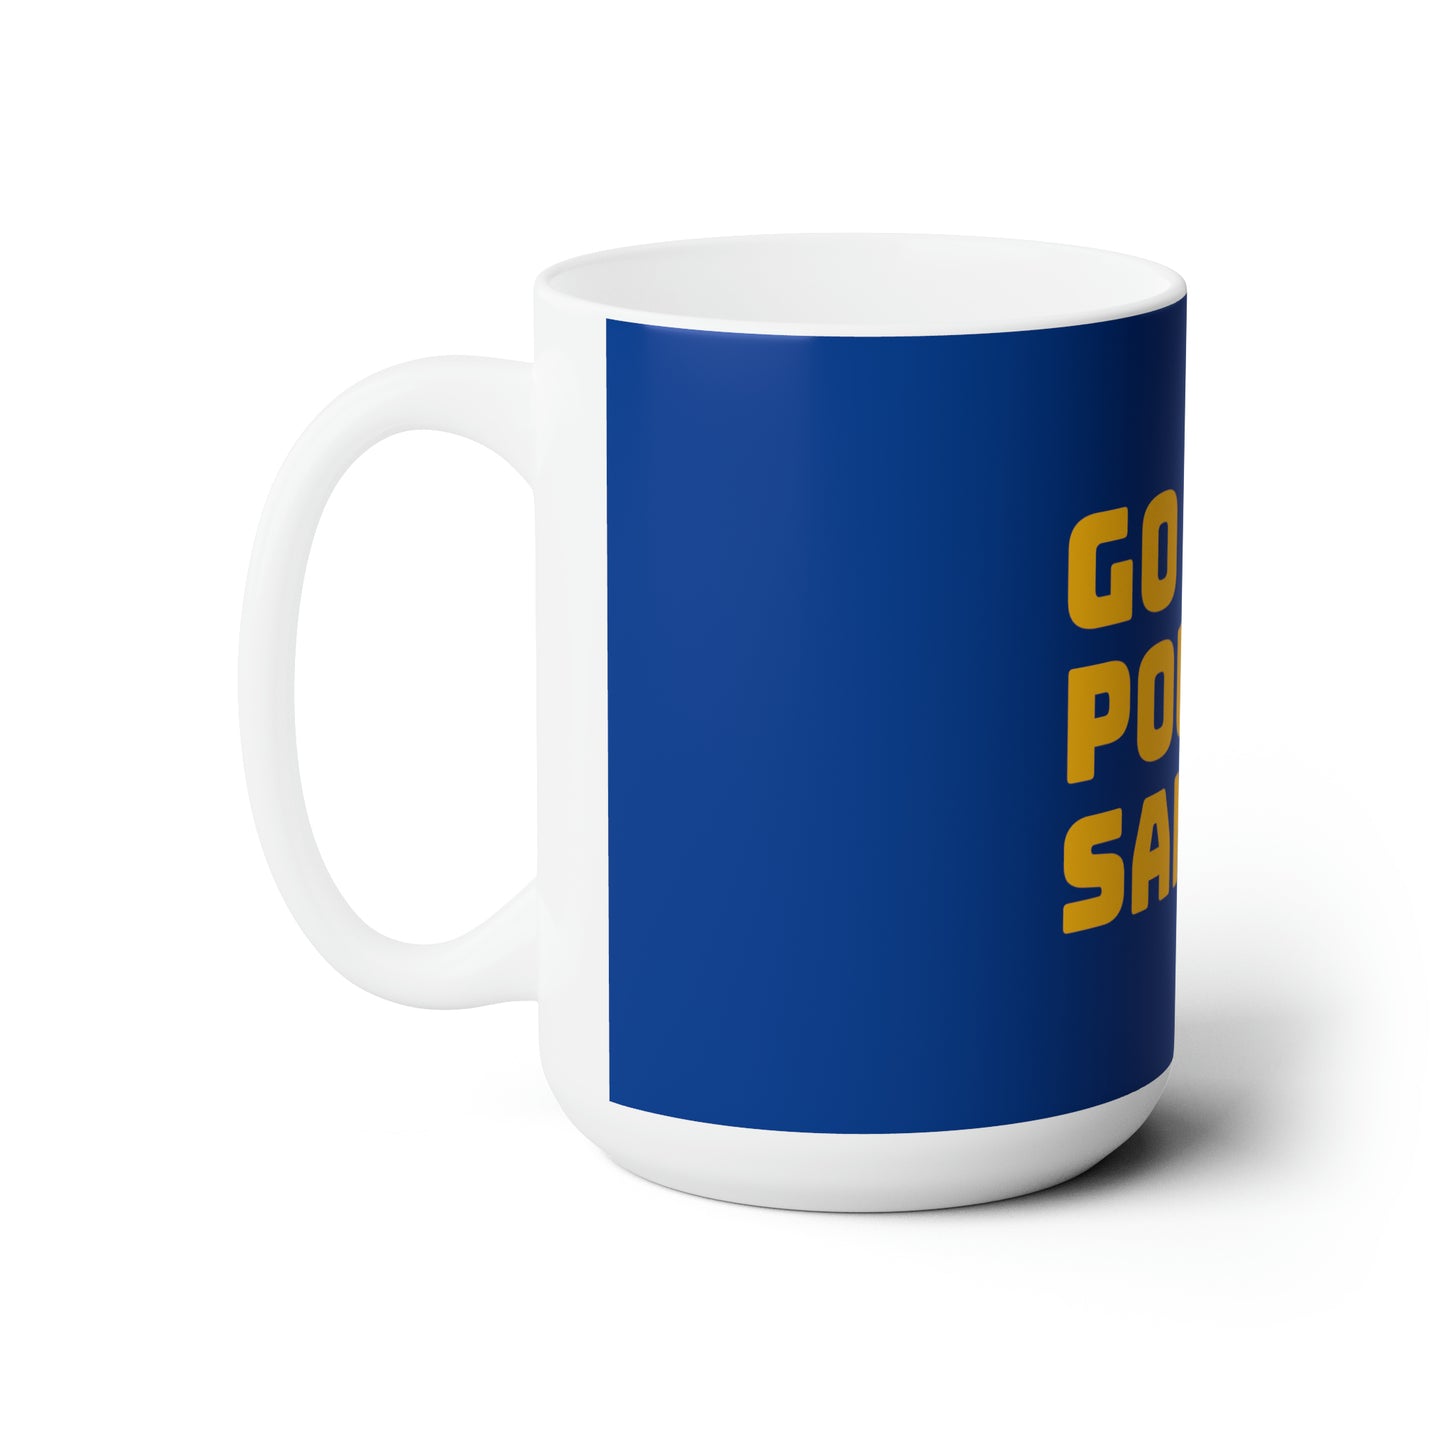 "Funny Office Coffee Mug - 'Go Pound Sand' Large 15 oz Ceramic Cup - Dishwasher Safe, Microwave Friendly, Humorous Gift for Coworkers"